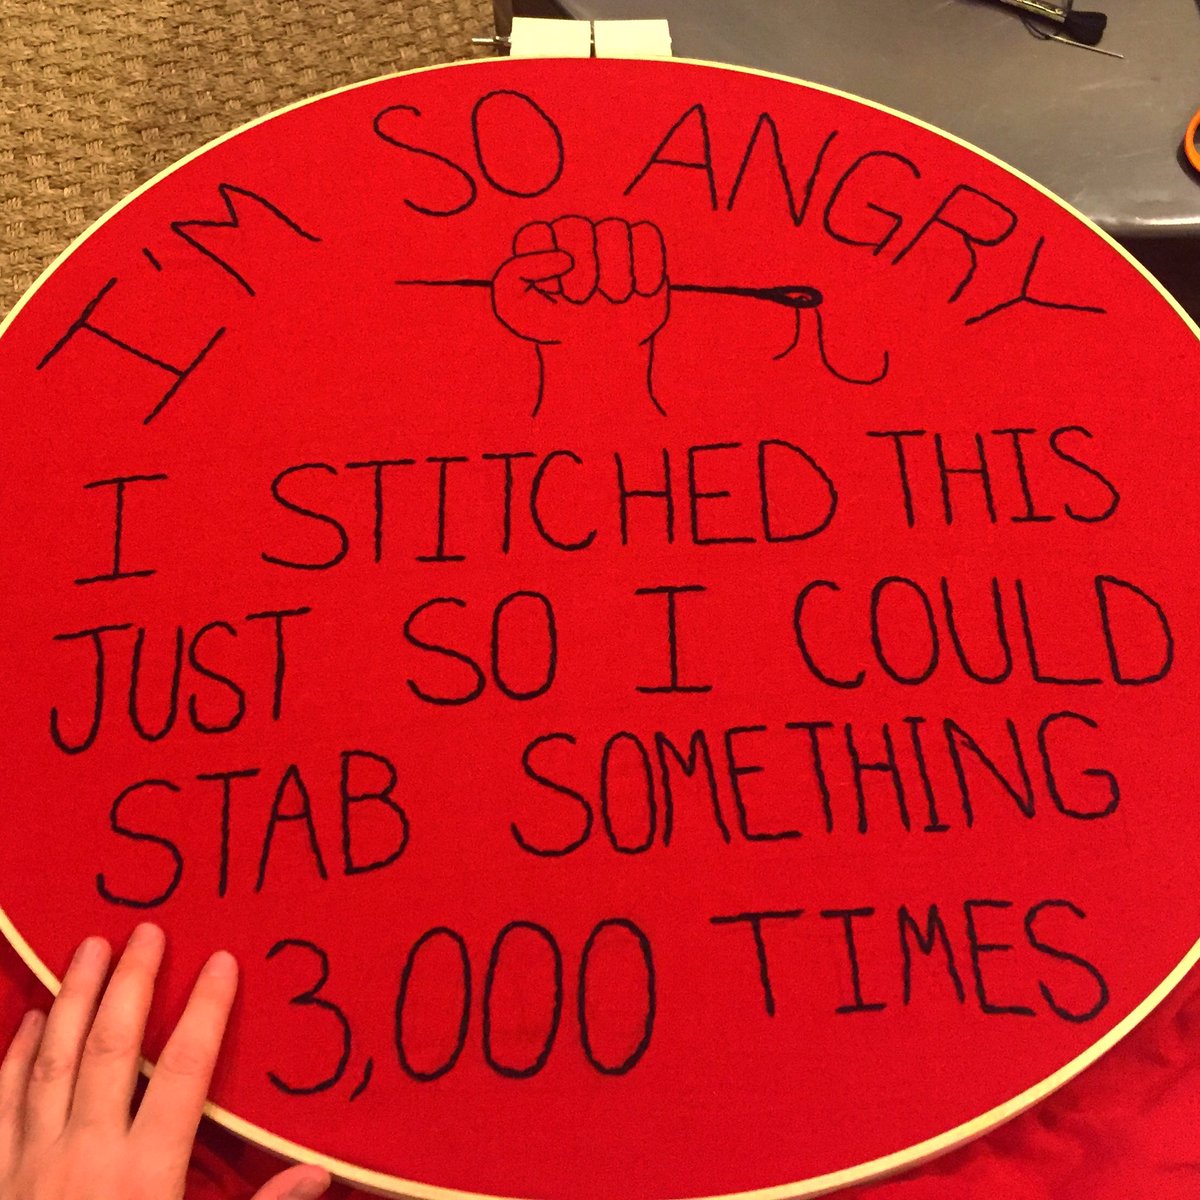 embroidery meme - So Anga I Stitched This Just So I Could Stab Something 73.000 Times